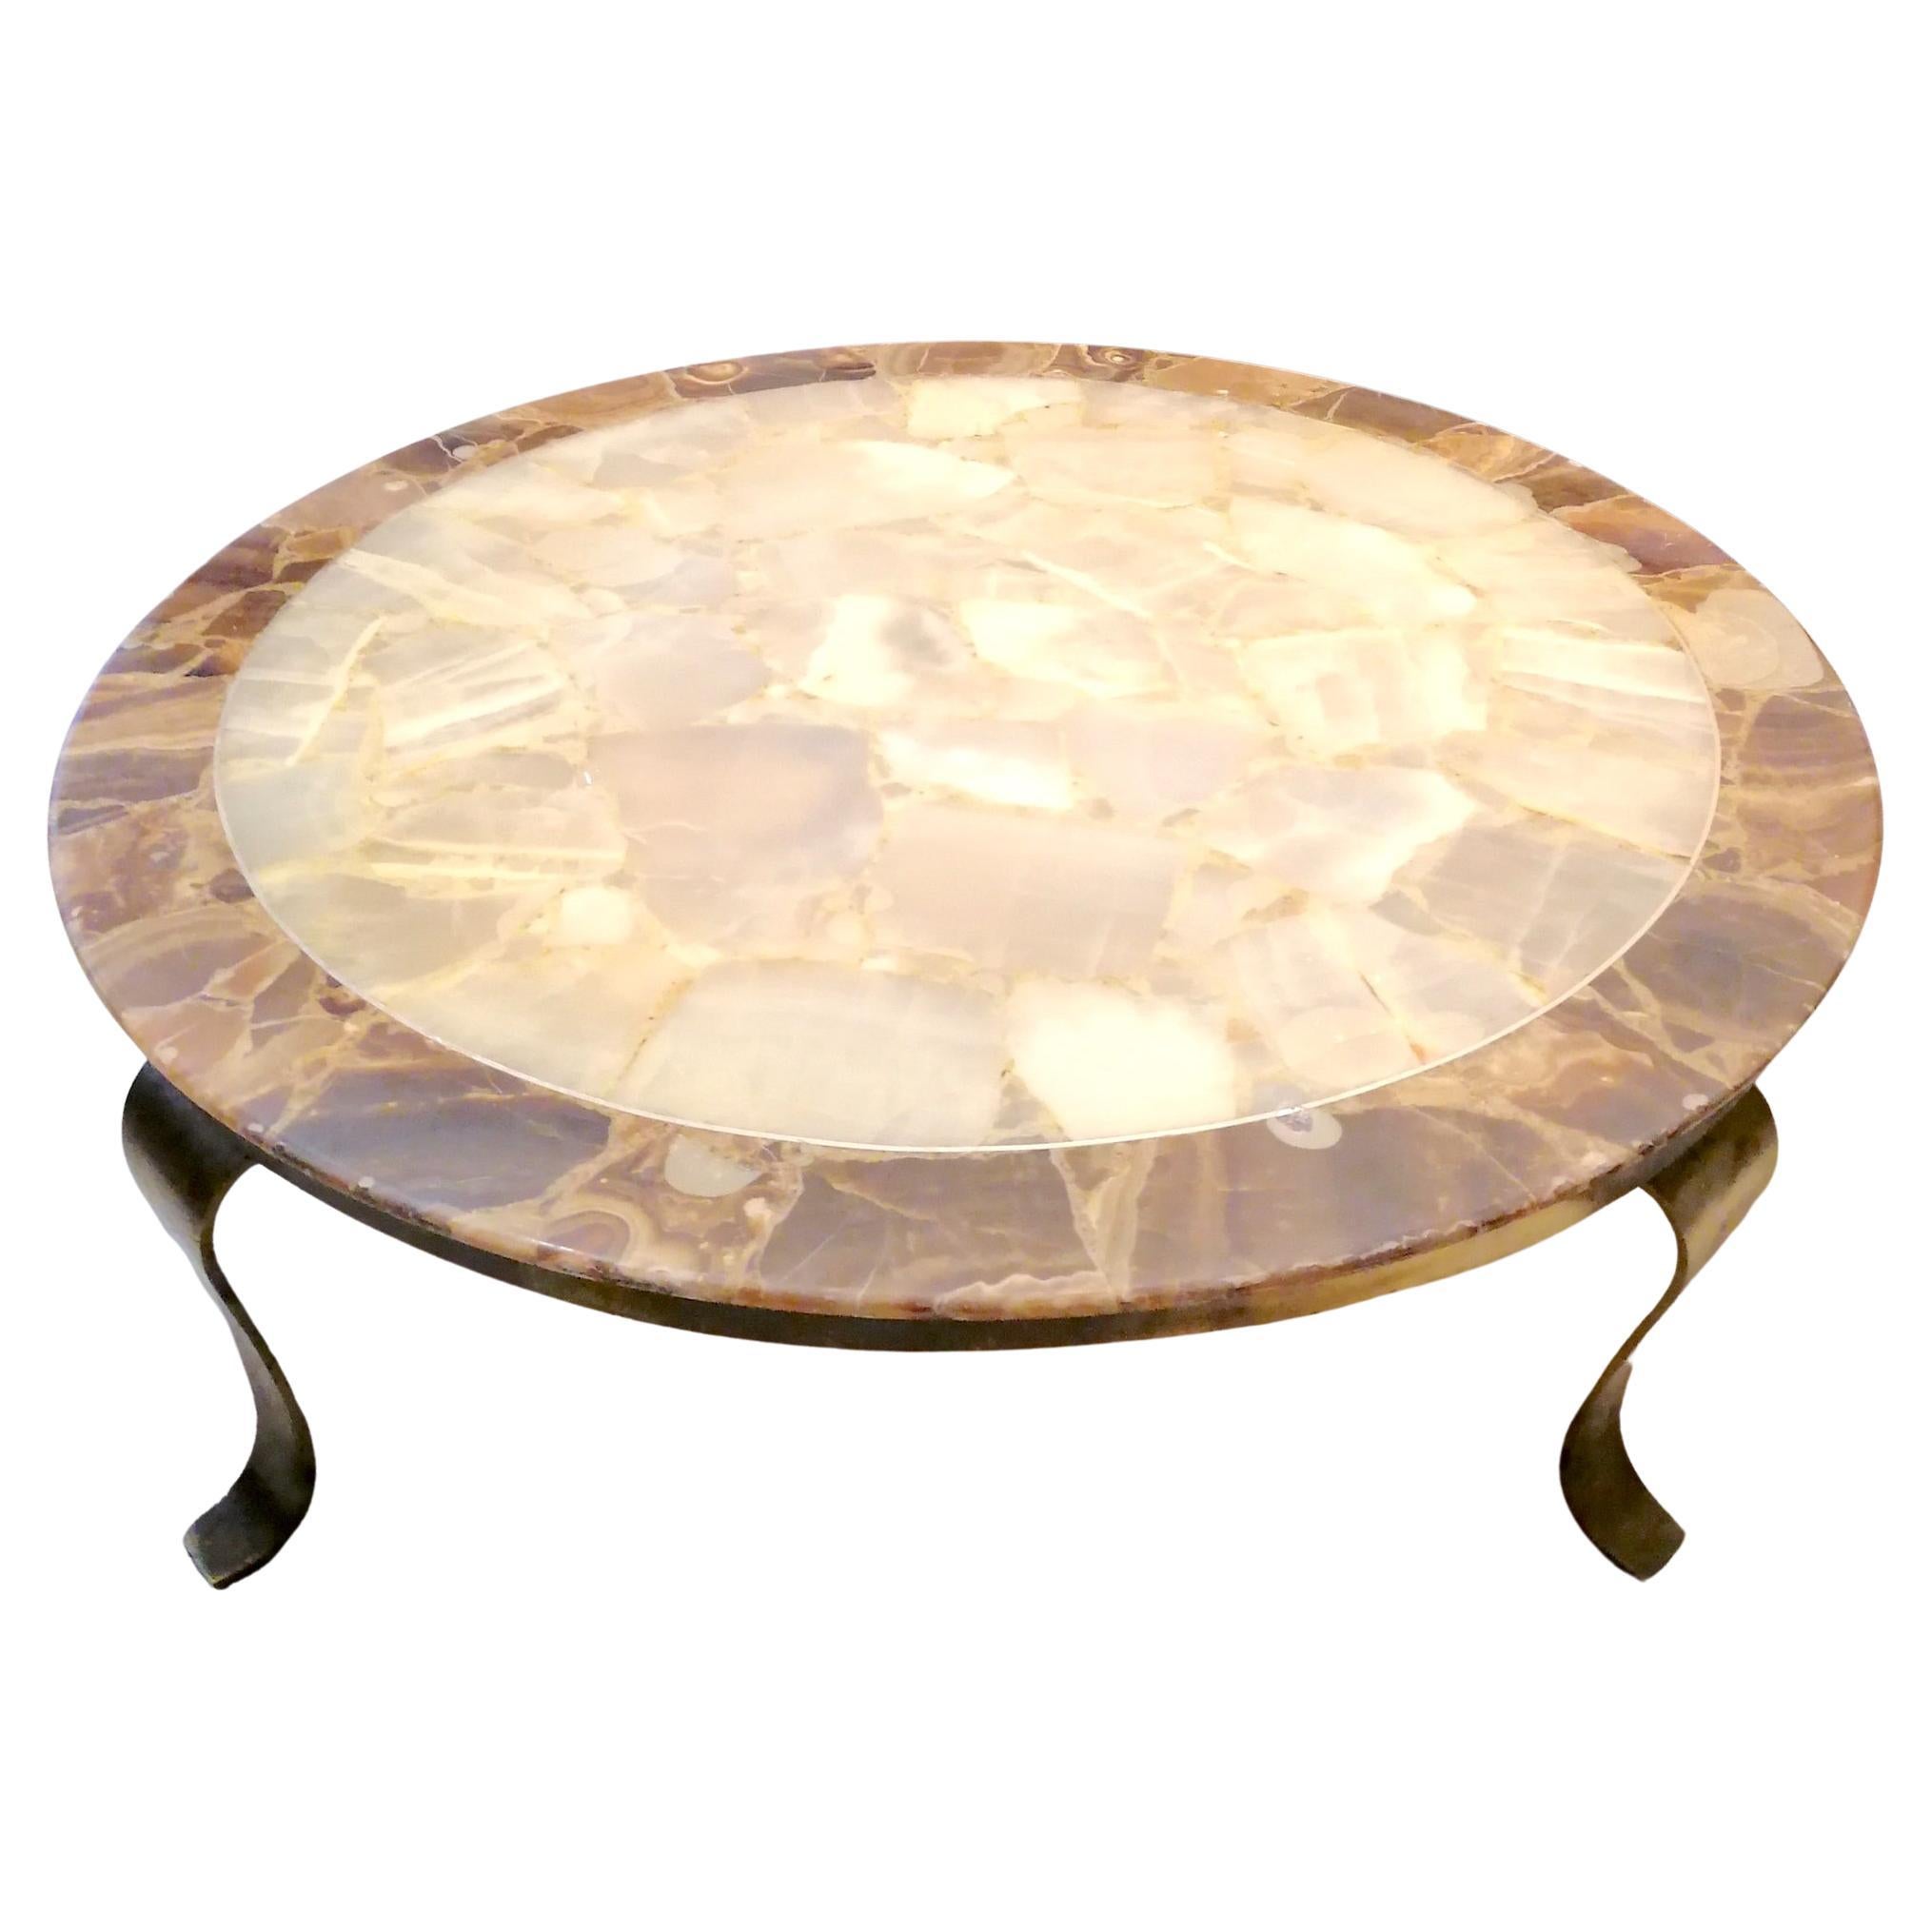 Mid century large onyx & brass coffee table by Roberto & Mito Block for Muller